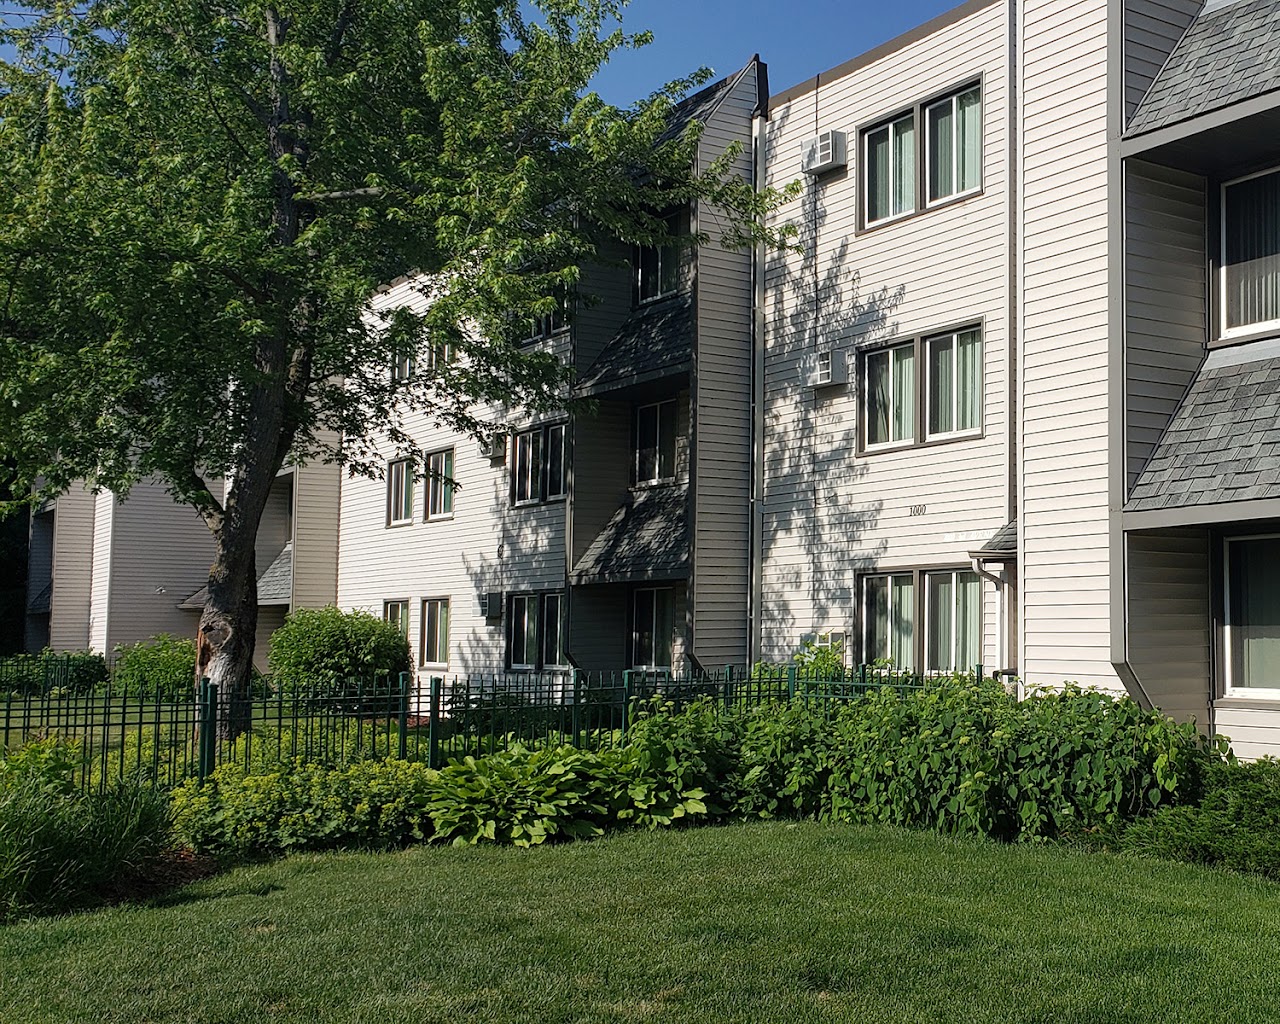 Photo of BUFFALO COURT. Affordable housing located at MULTIPLE BUILDING ADDRESSES BUFFALO, MN 55313